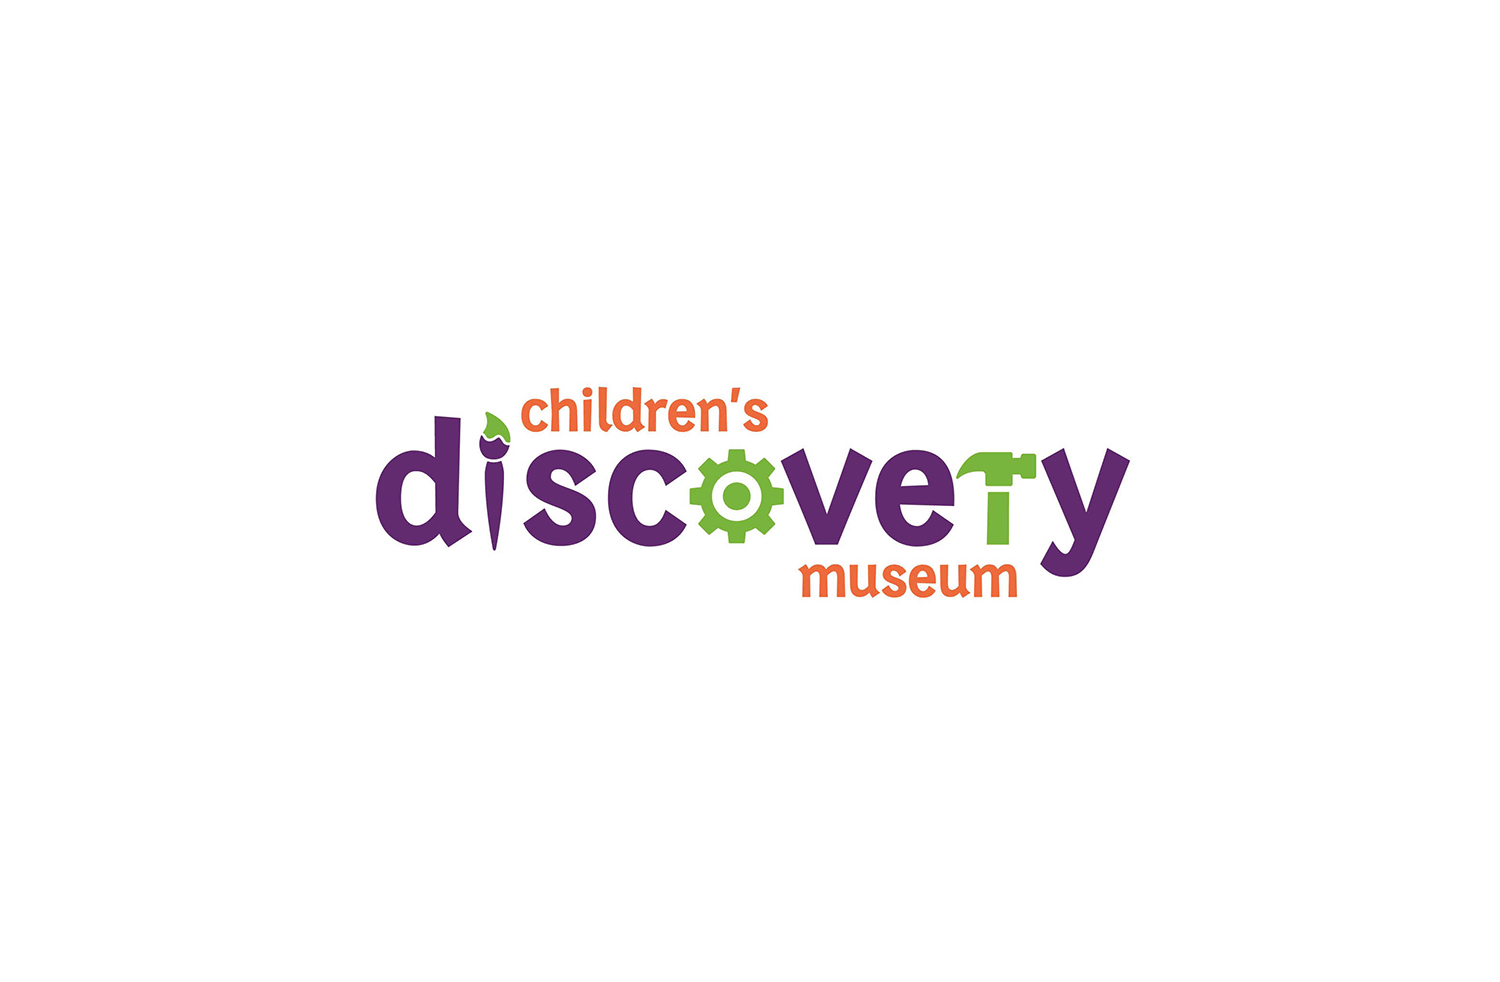 Boss_Display_Client_Childrens_Discovery_Museum_Logo.jpg